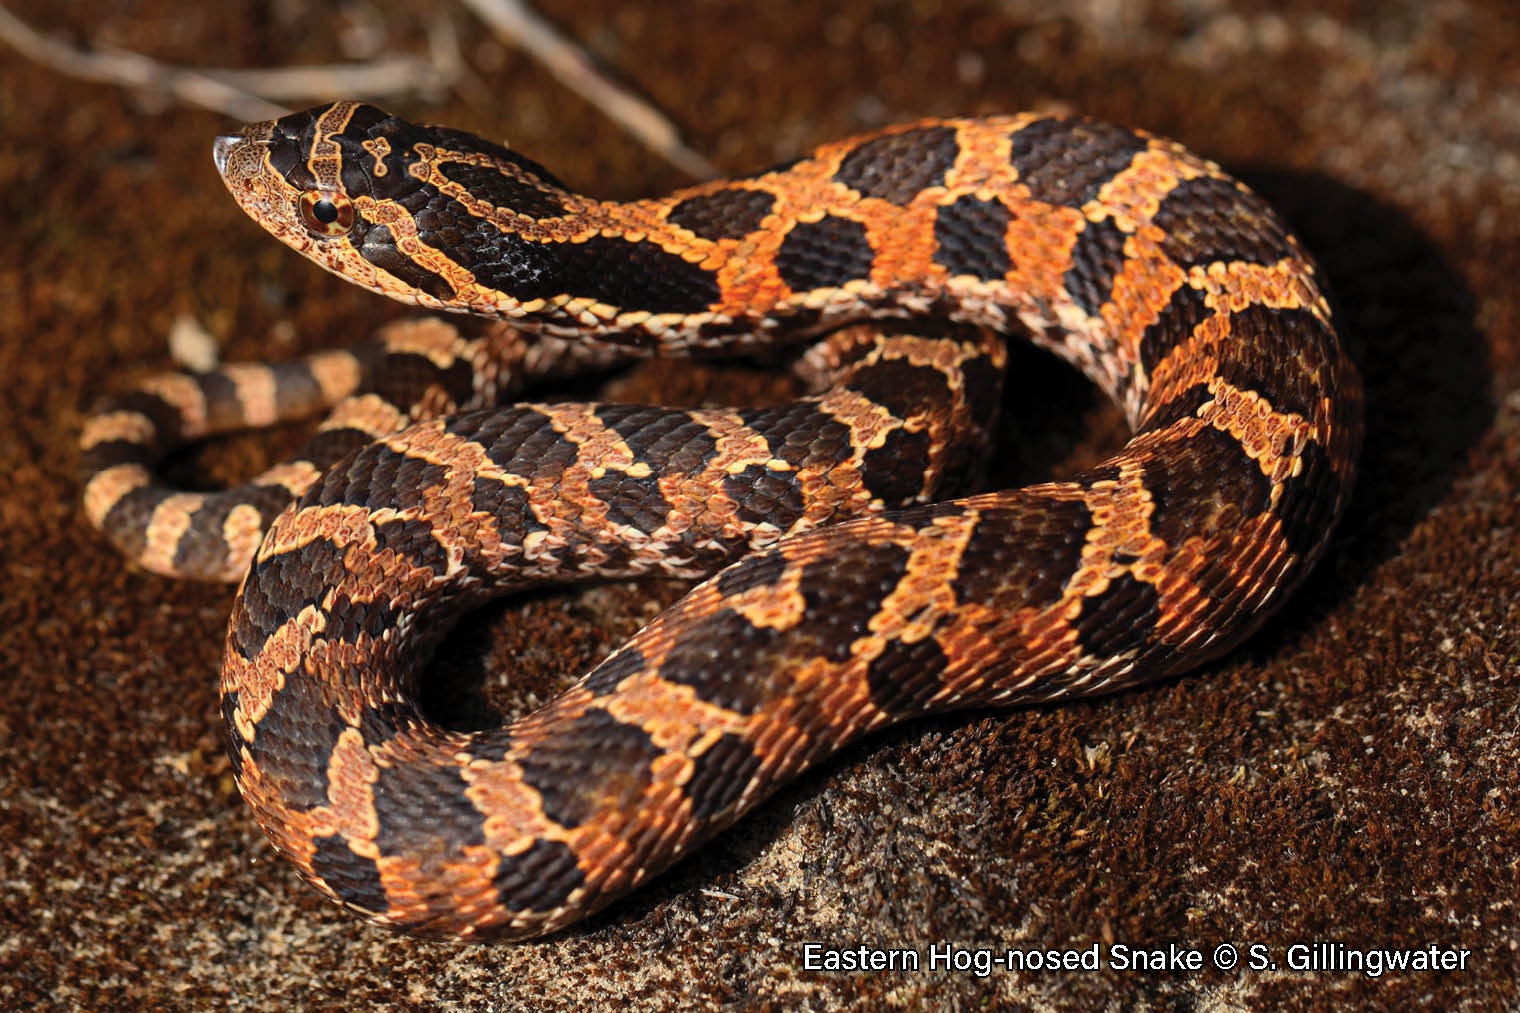 Picture of an Eastern Hog-nosed snake, a thick-bodied orangish-brown snake with dark brown blotches and an upturned snout.